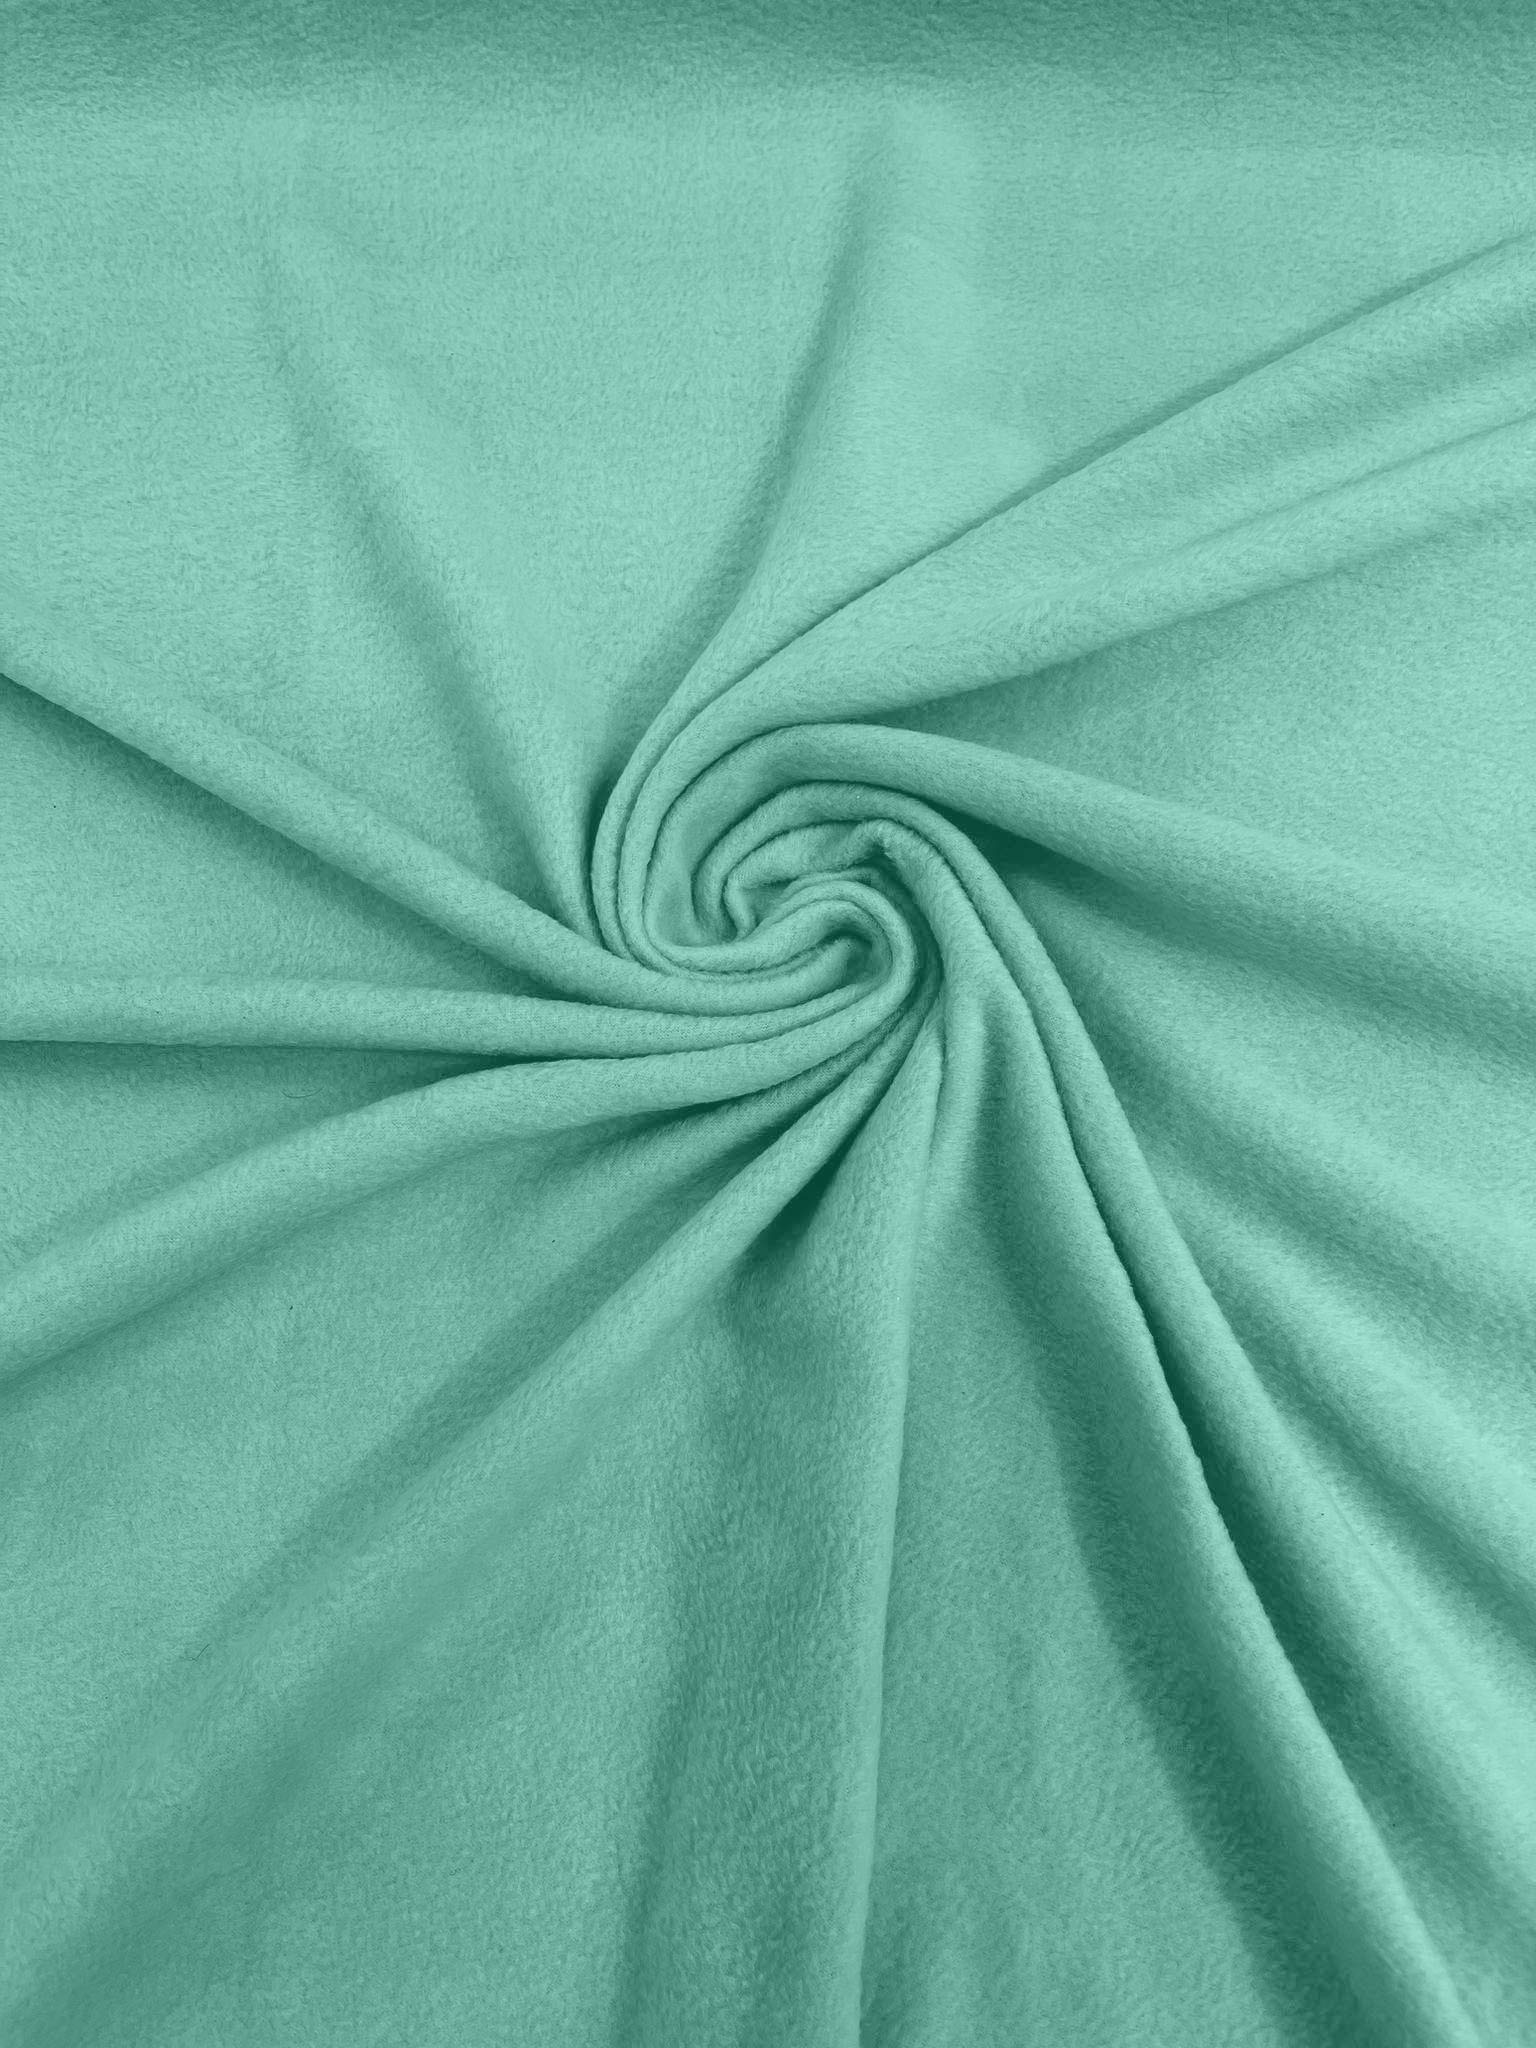 Ice Mint Solid Polar Fleece Fabric Anti-Pill 58" Wide Sold by The Yard